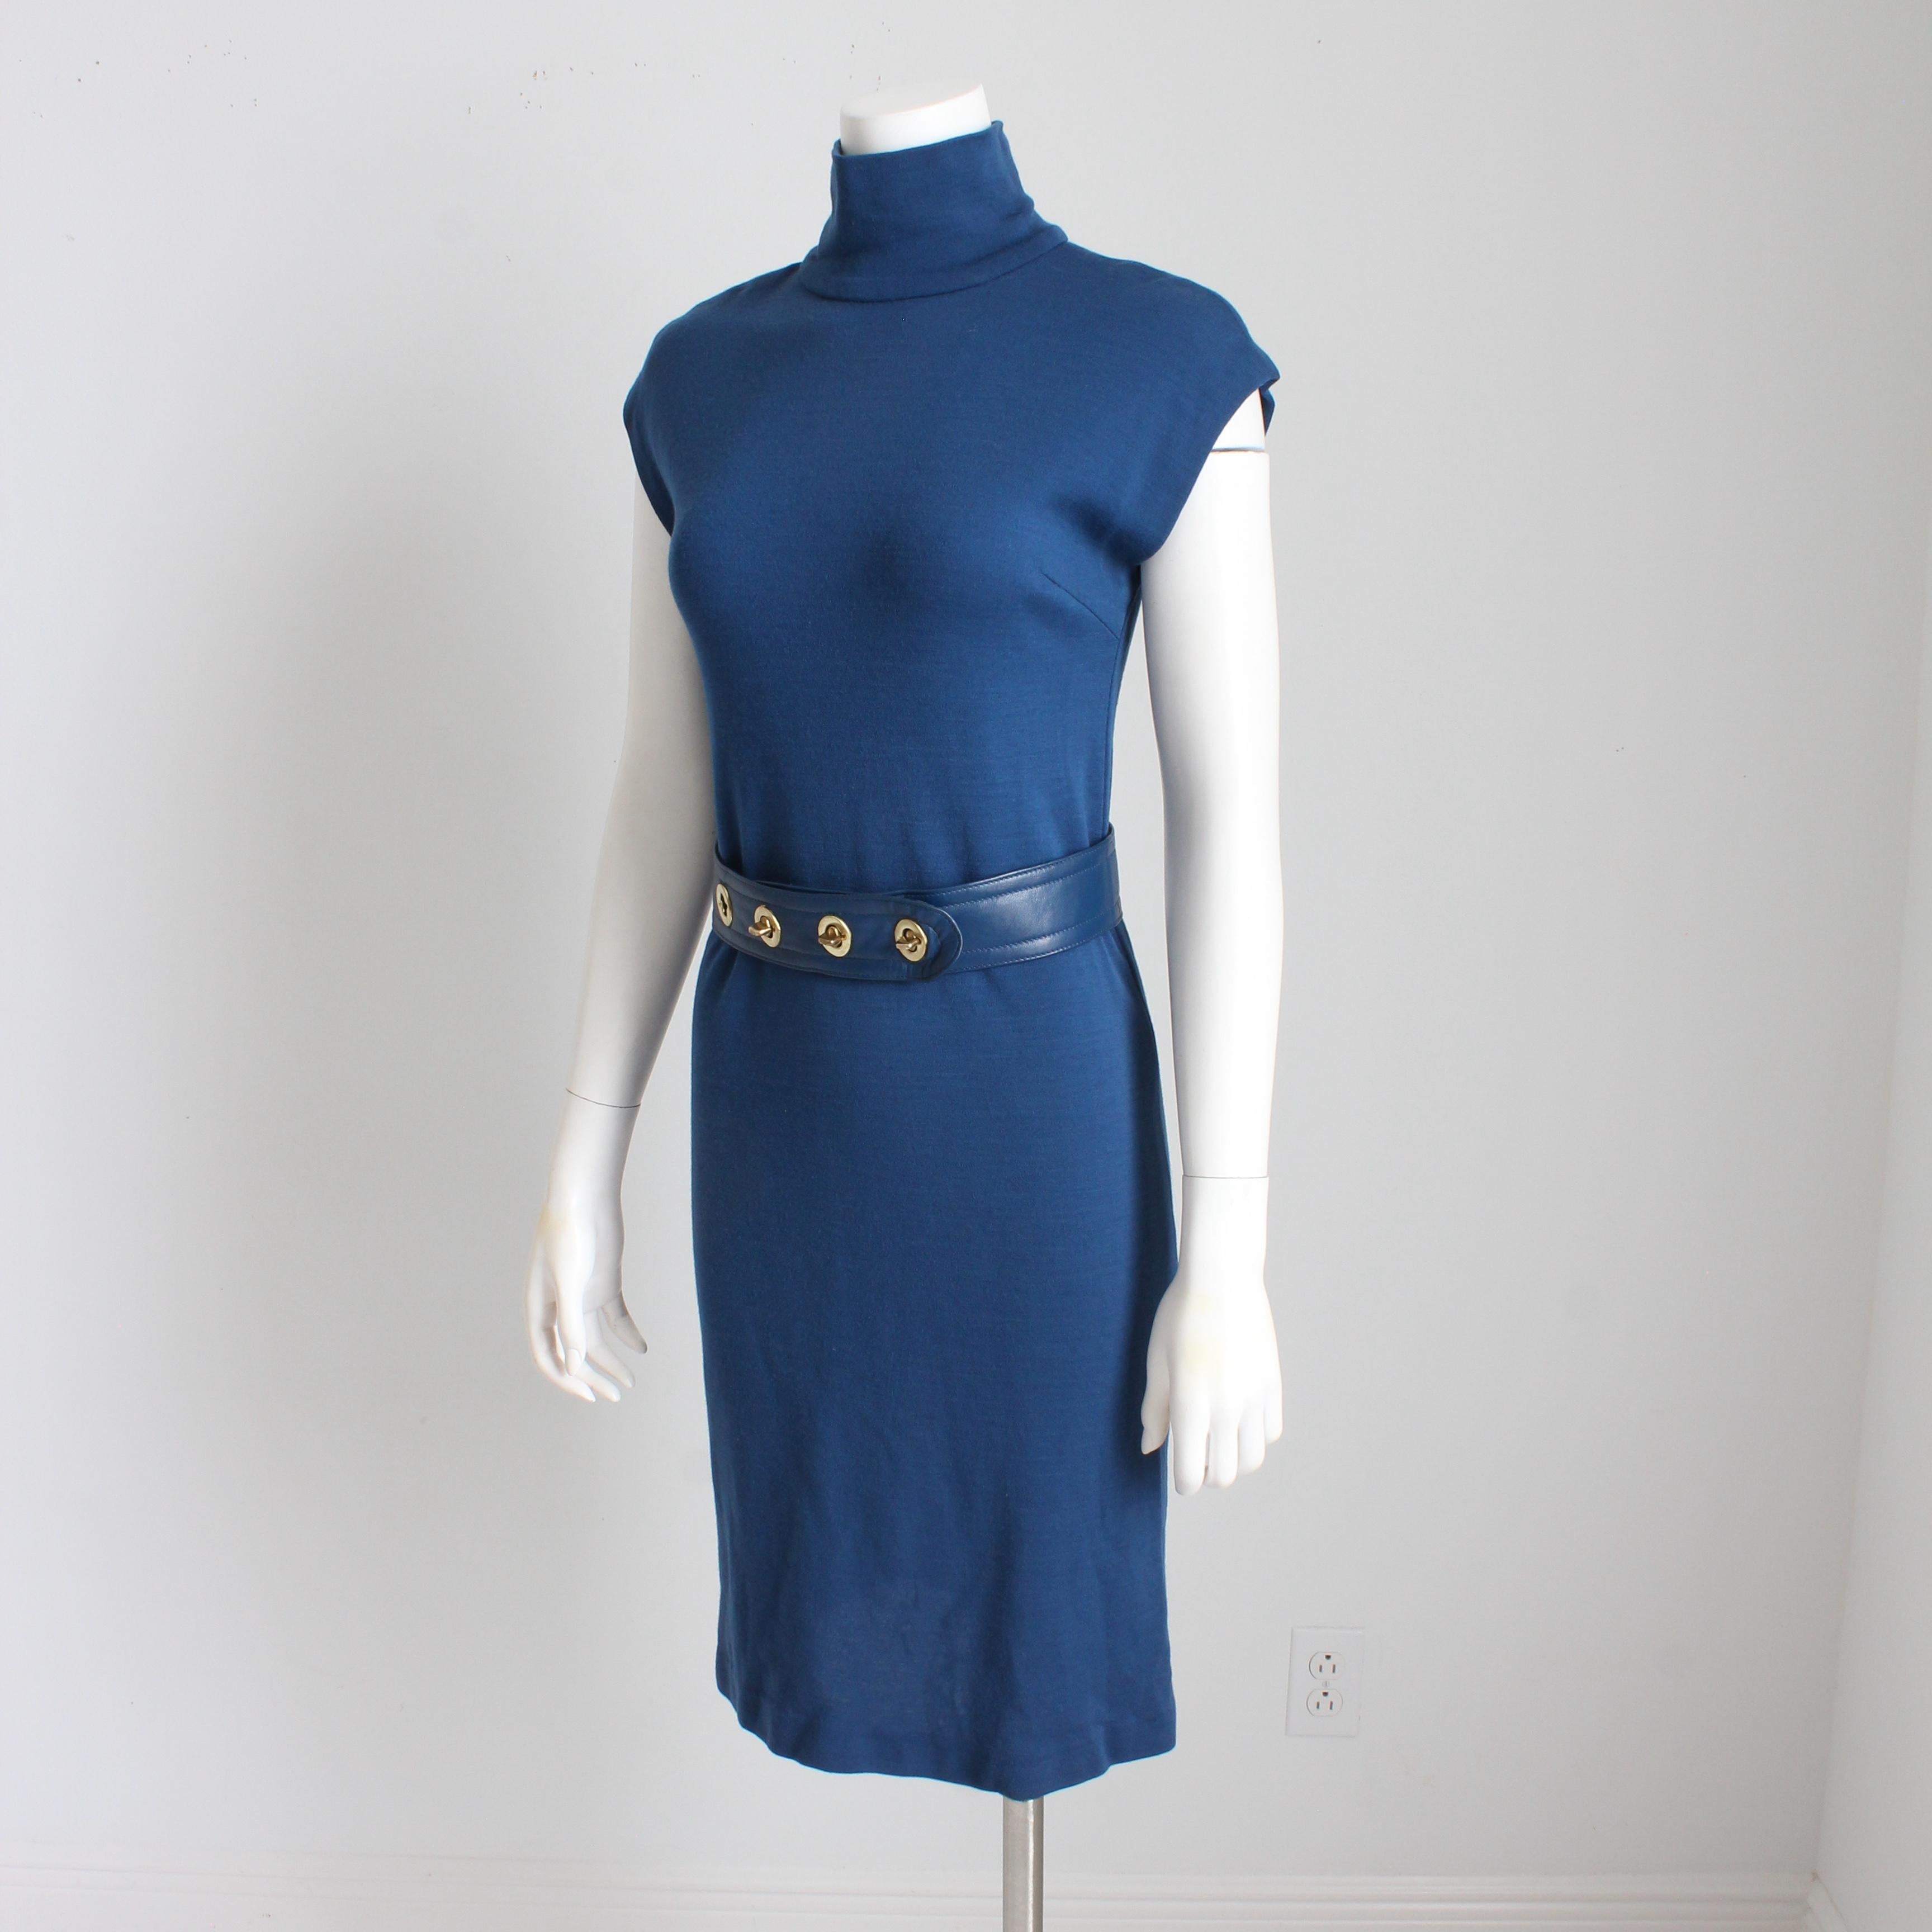 Bonnie Cashin for Sills Dress and Turnlock Belt 2pc Set Wool Leather Vintage HTF For Sale 2